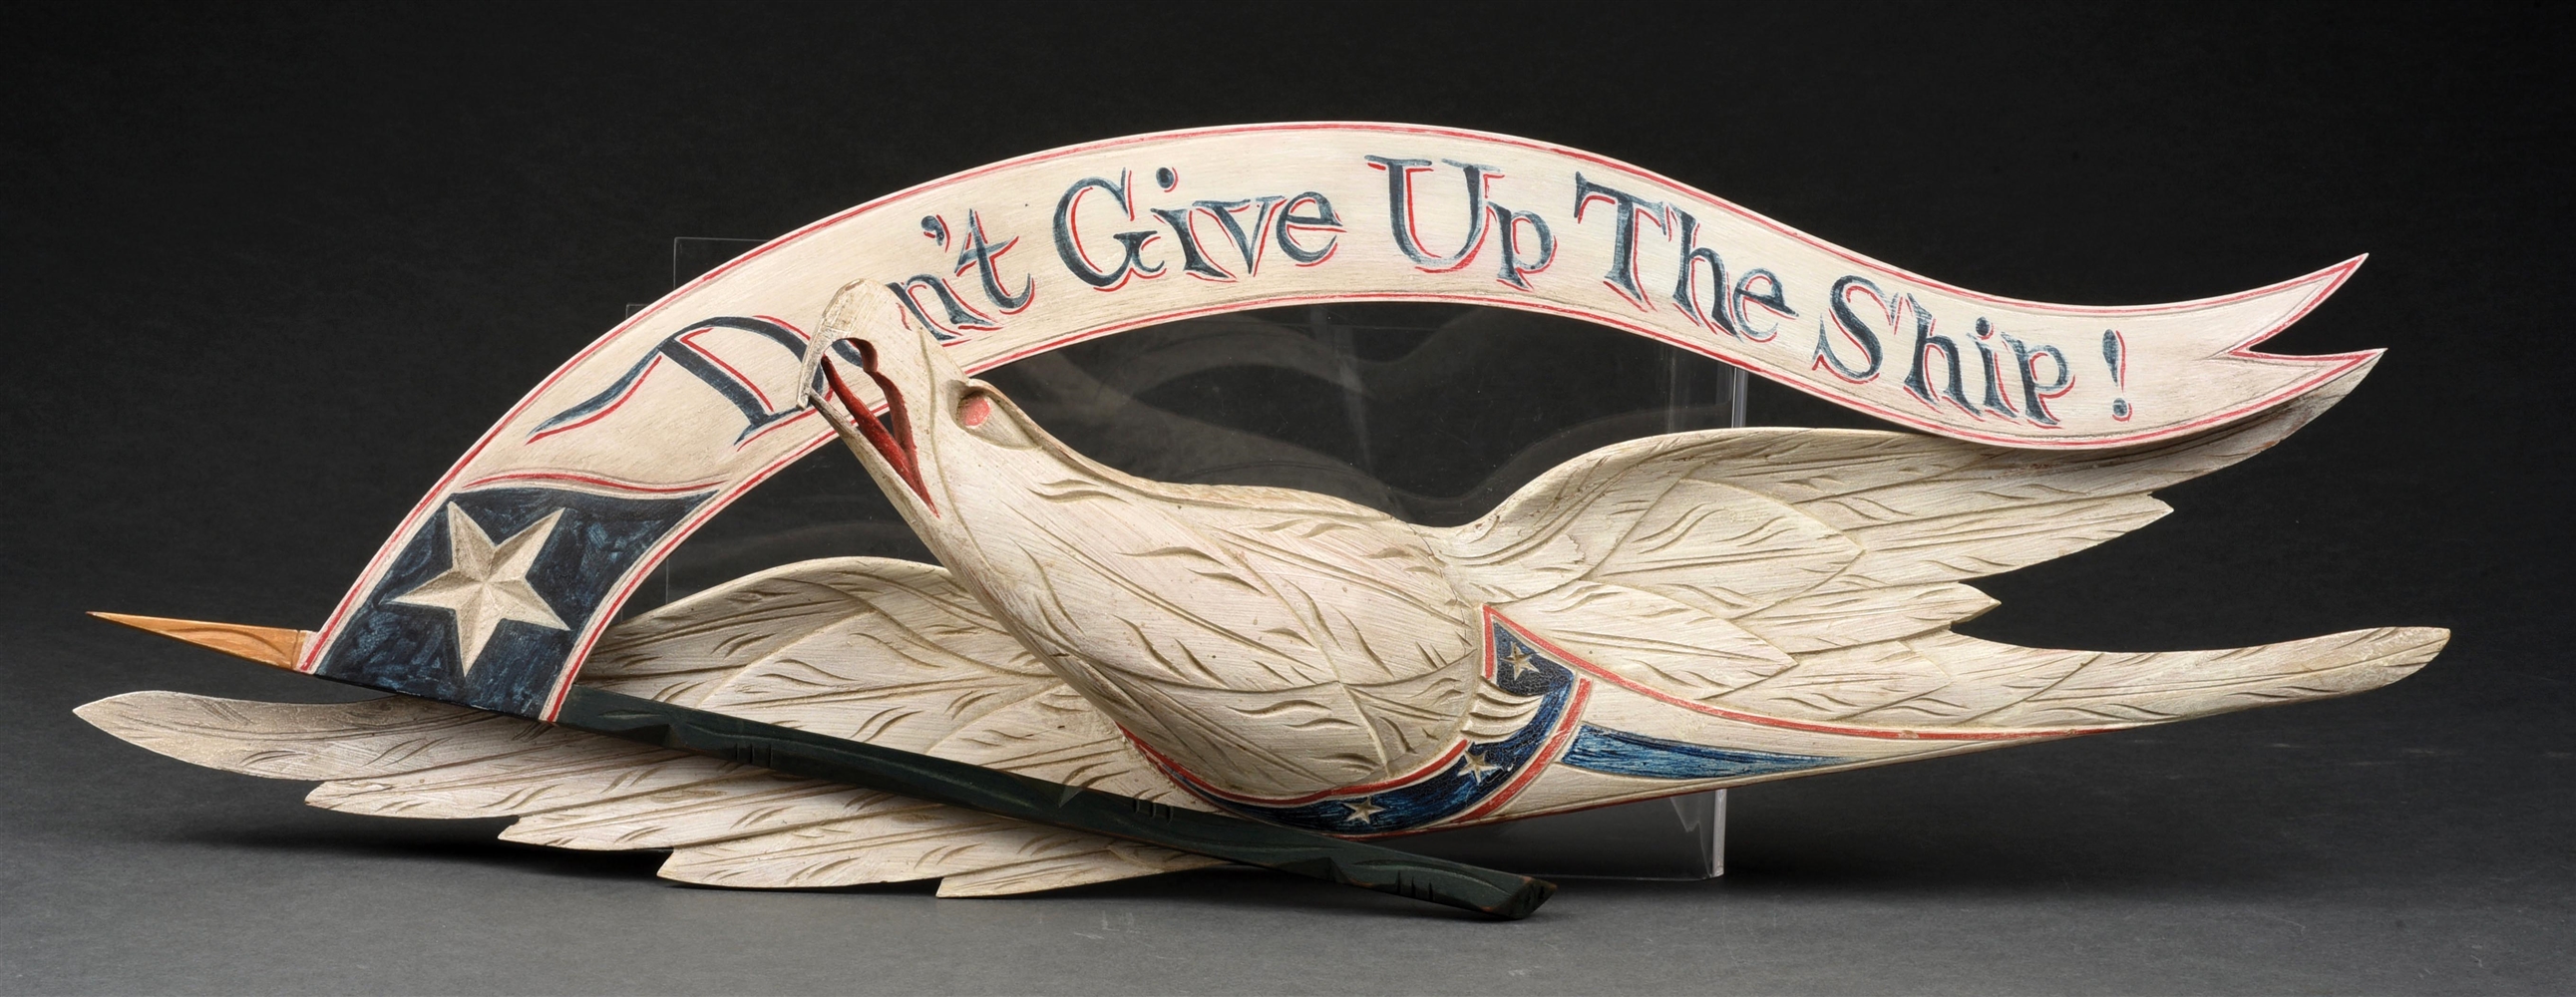 JOHN HALEY BELLAMY CARVED EAGLE "DONT GIVE UP THE SHIP"